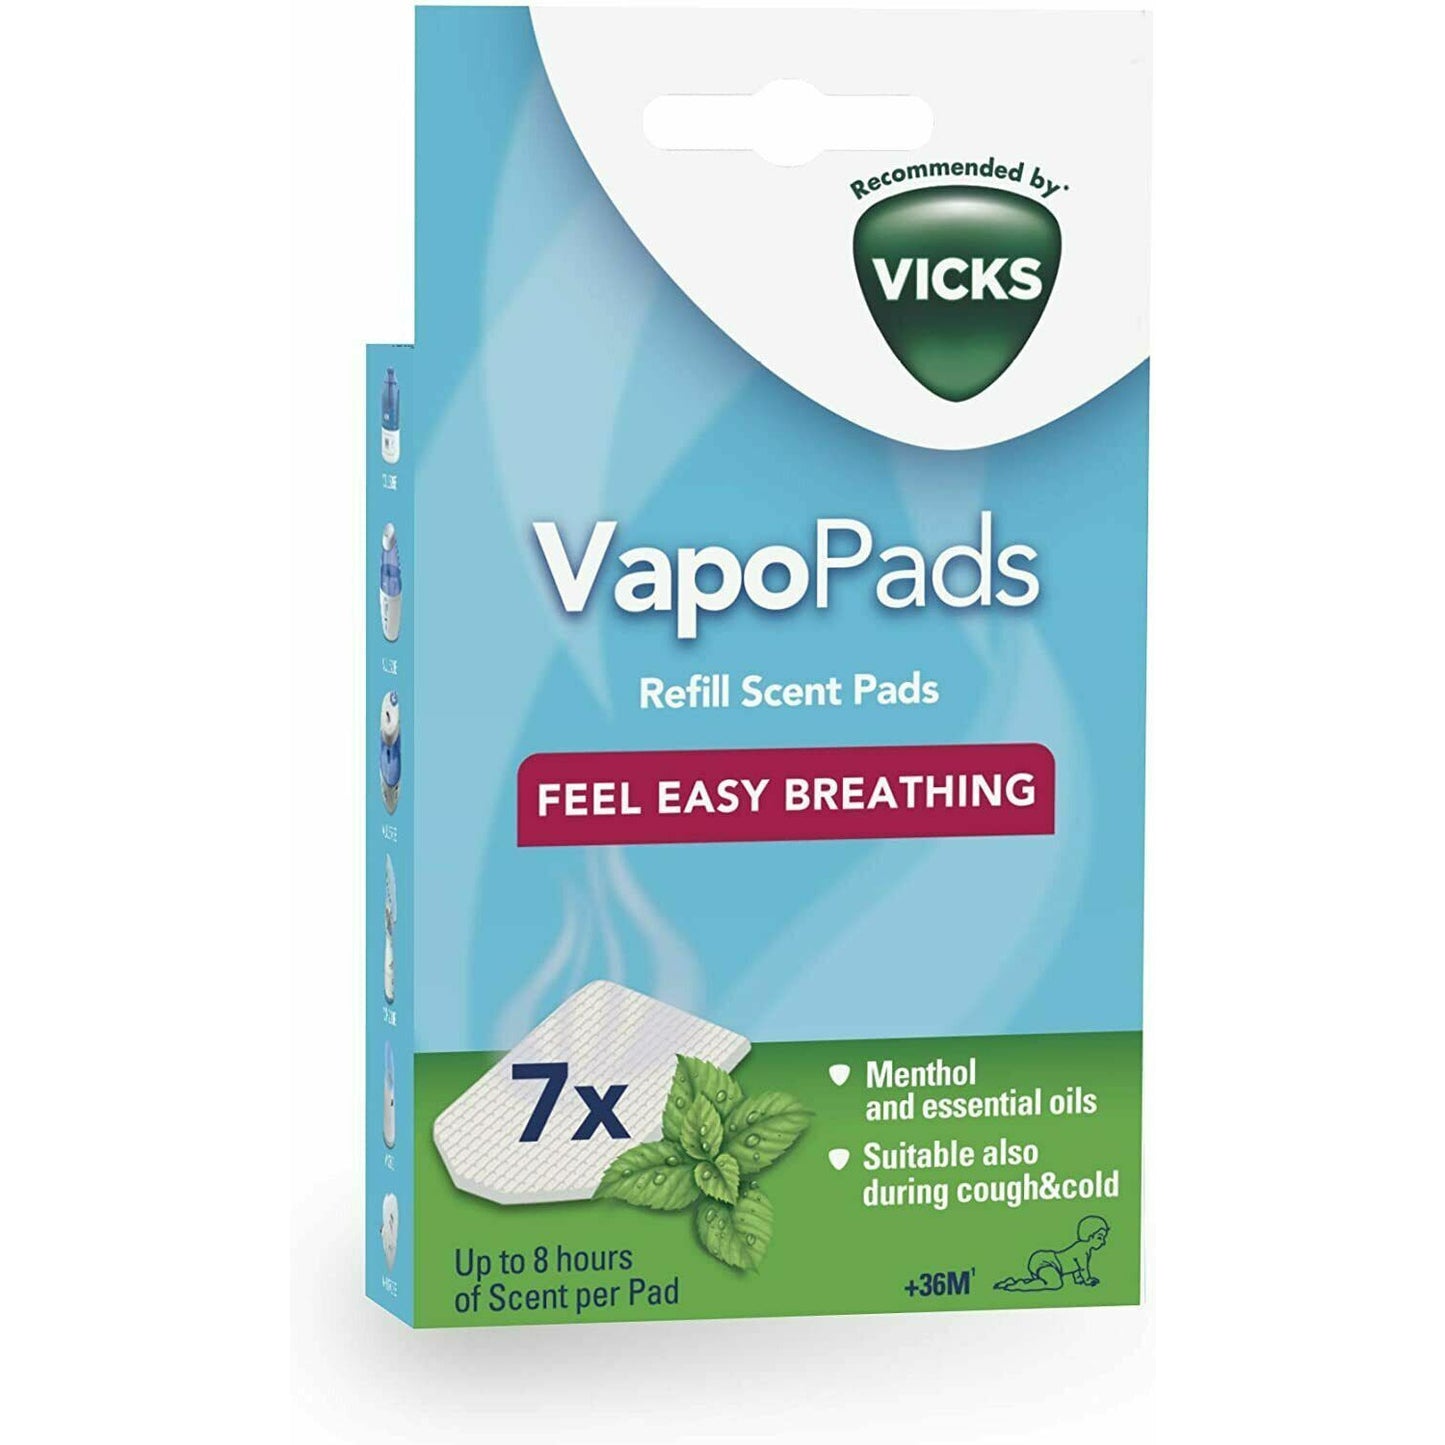 Vicks Comforting Vapopads Refill Scent Rosemary & Lavender or Menthol Oil Pads